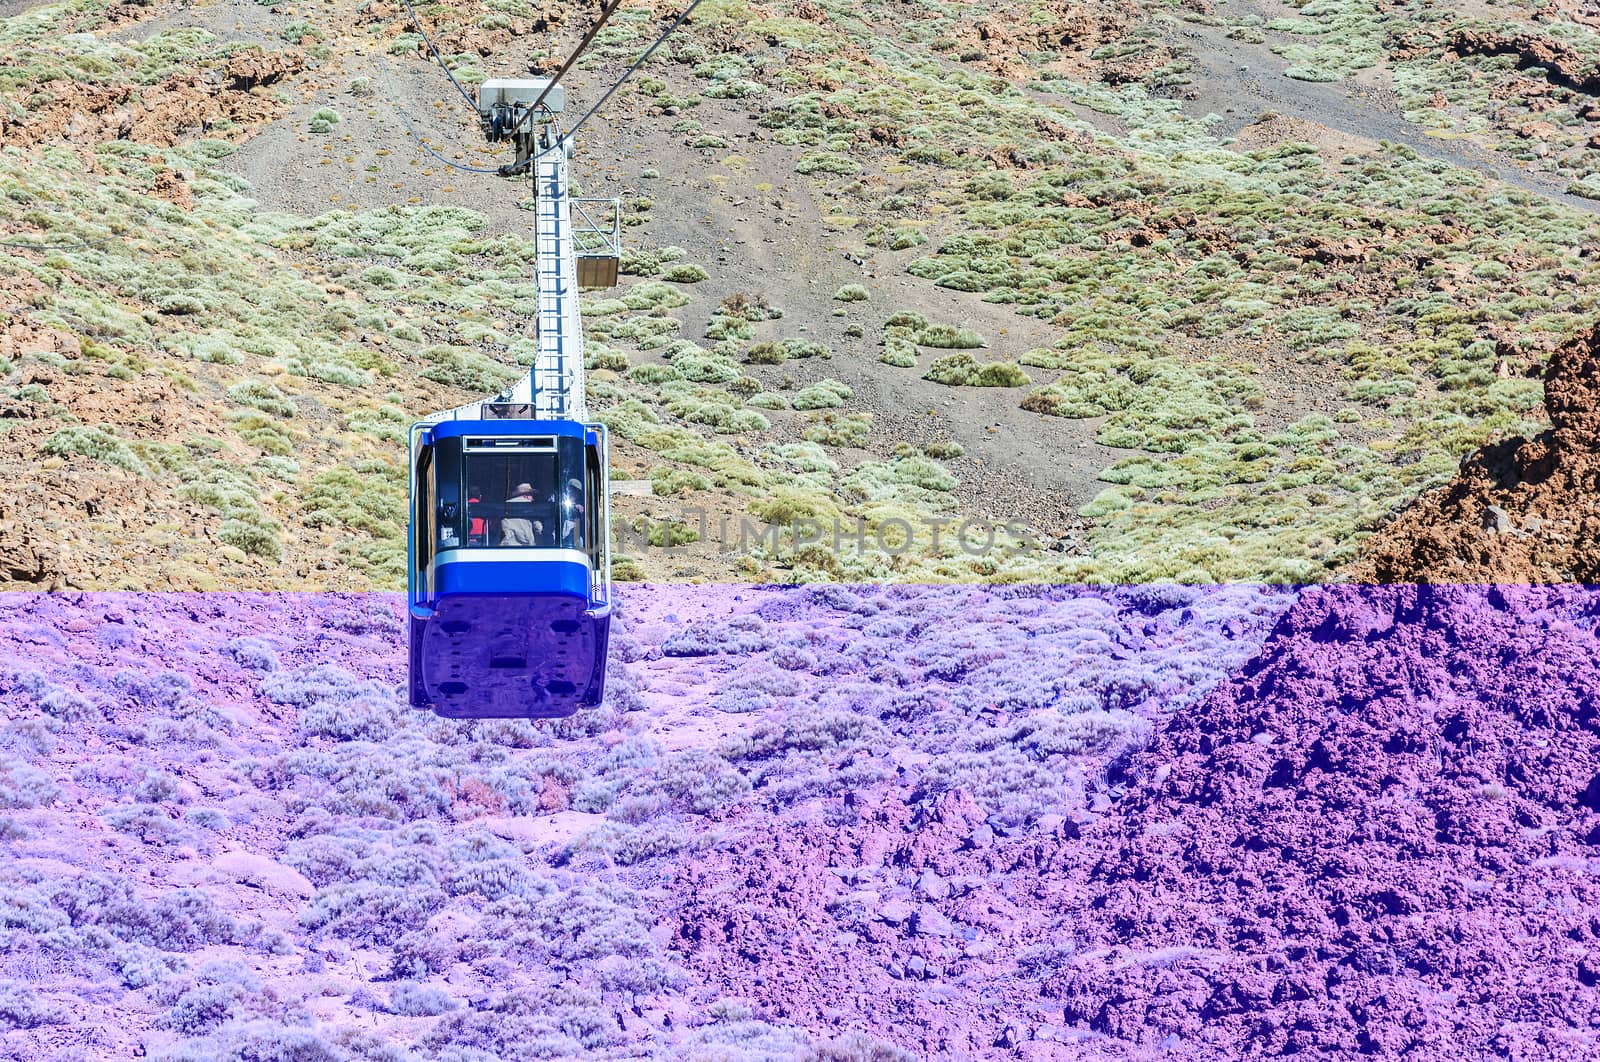 The cable car on the island of Tenerife for the ascent and descent of tourists on the volcano Teide.



